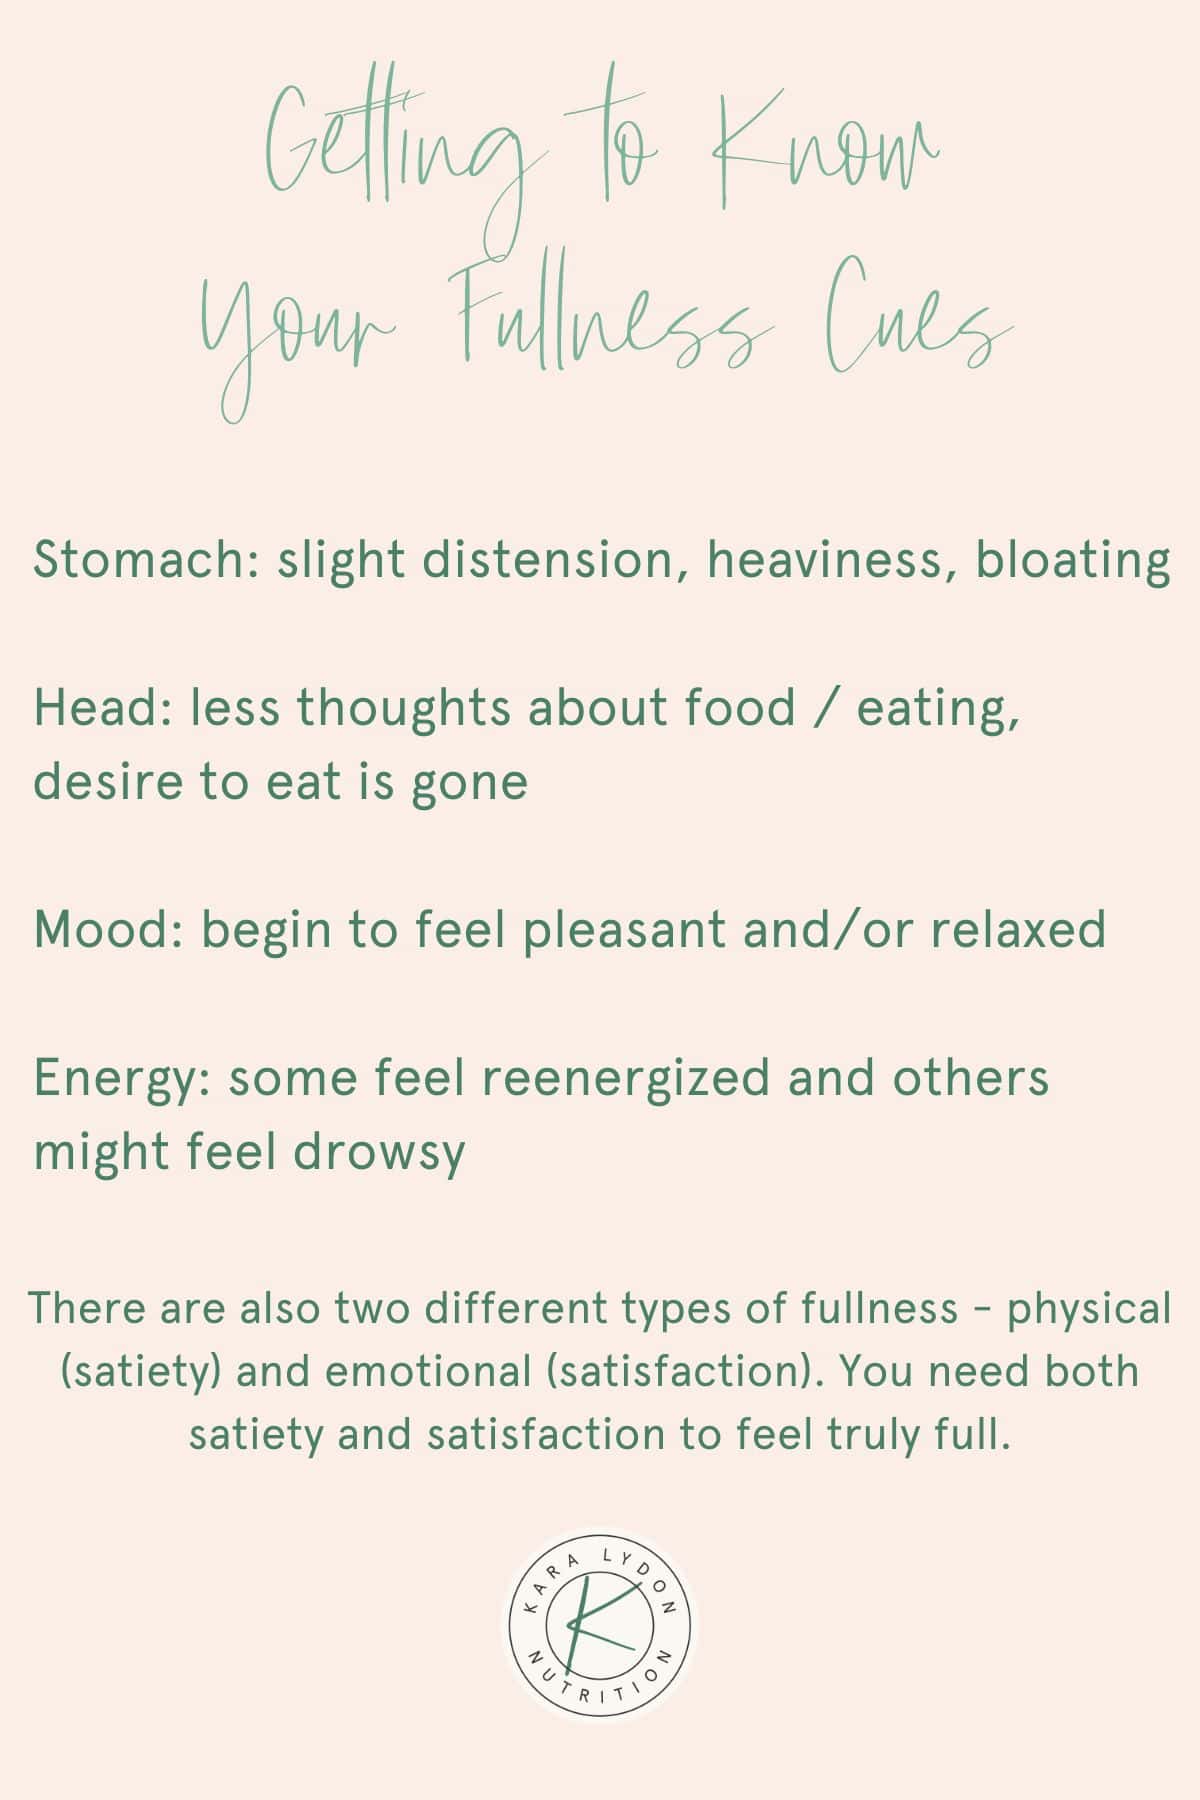 Graphic listing ways of getting to know your fullness cues with symptoms